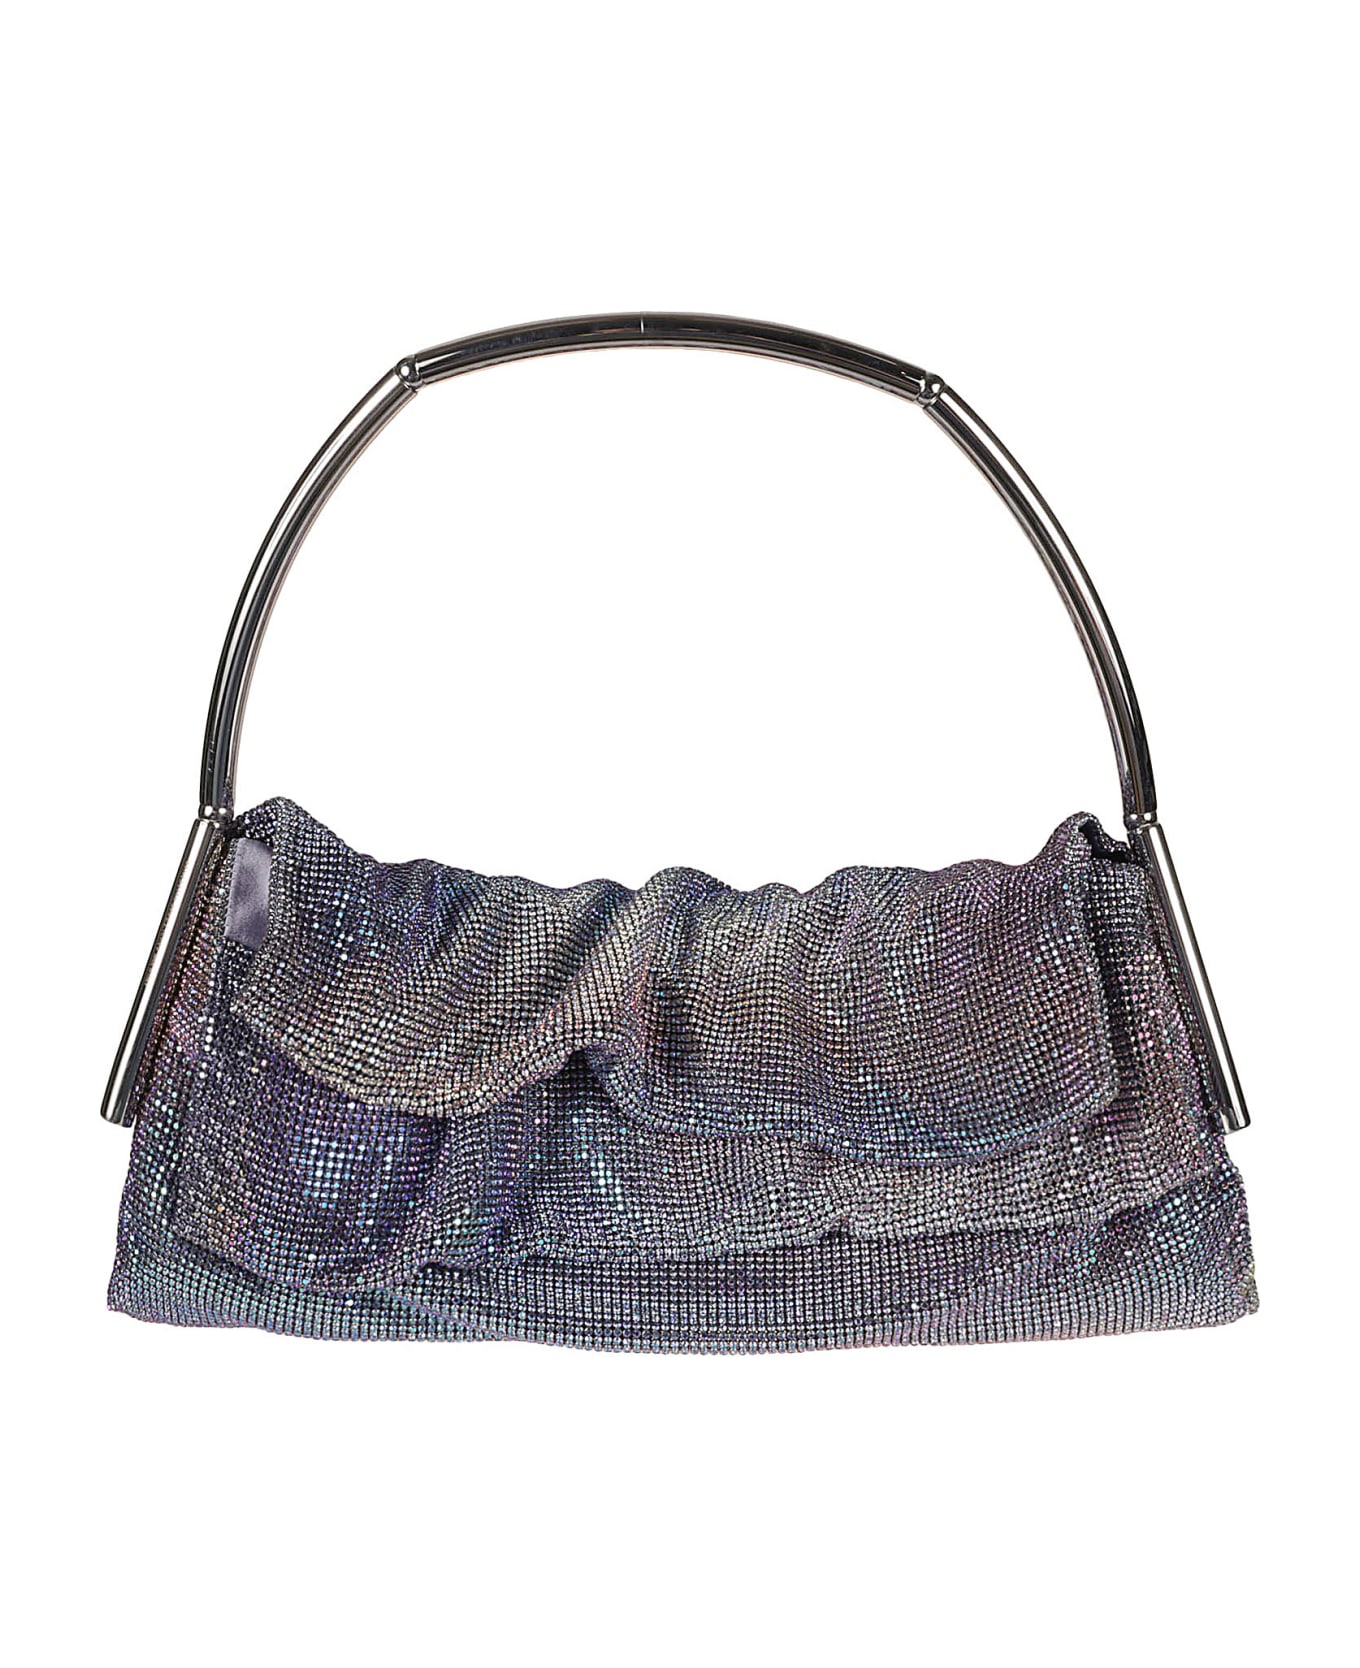 Benedetta Bruzziches Metallic Handle Embellished All-over Tote -  spectre